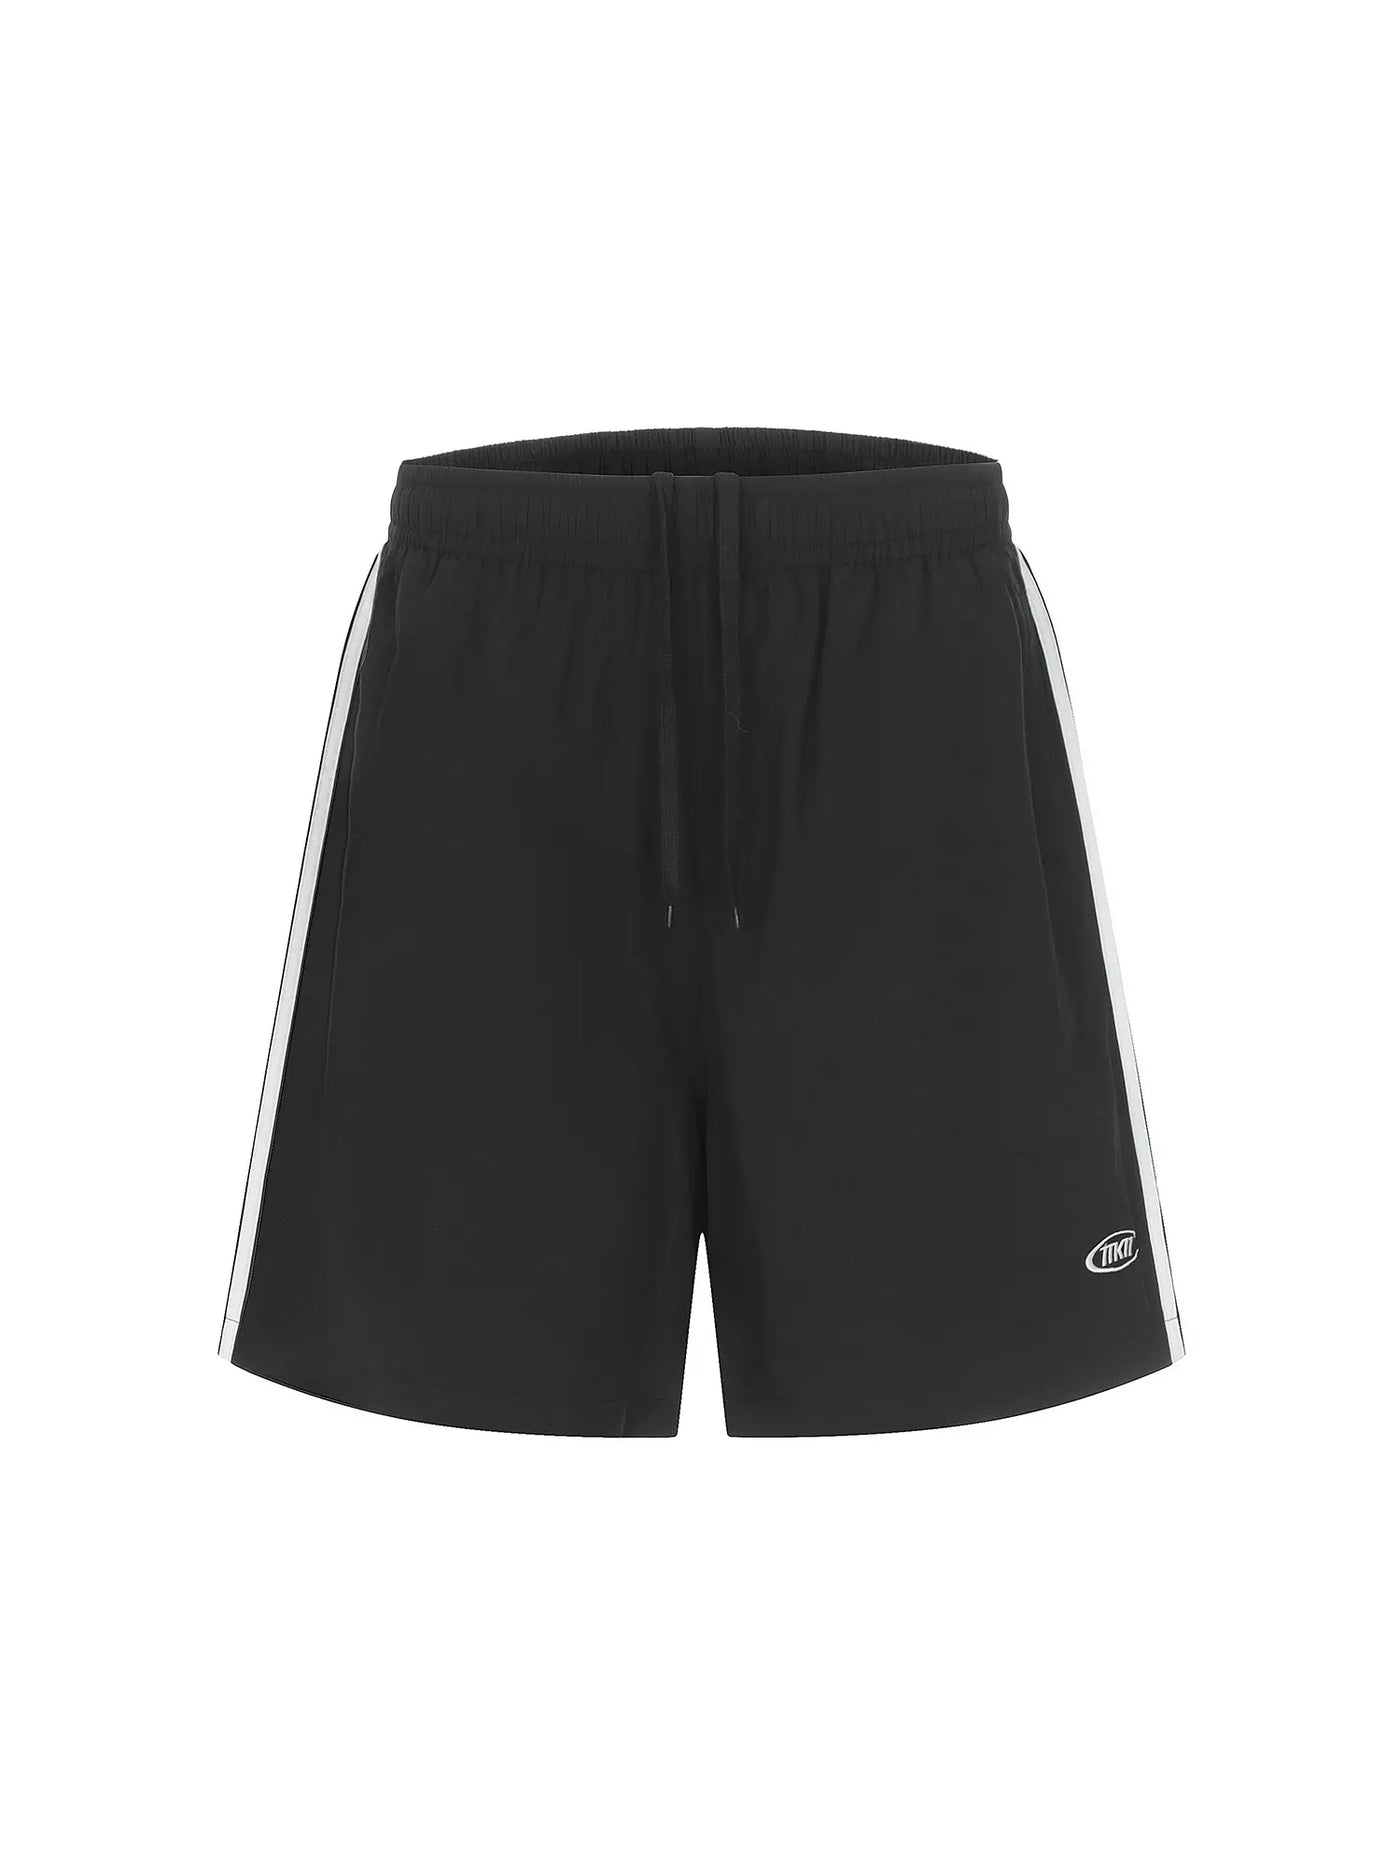 Athleisure Comfty Fit Shorts Korean Street Fashion Shorts By MaxDstr Shop Online at OH Vault